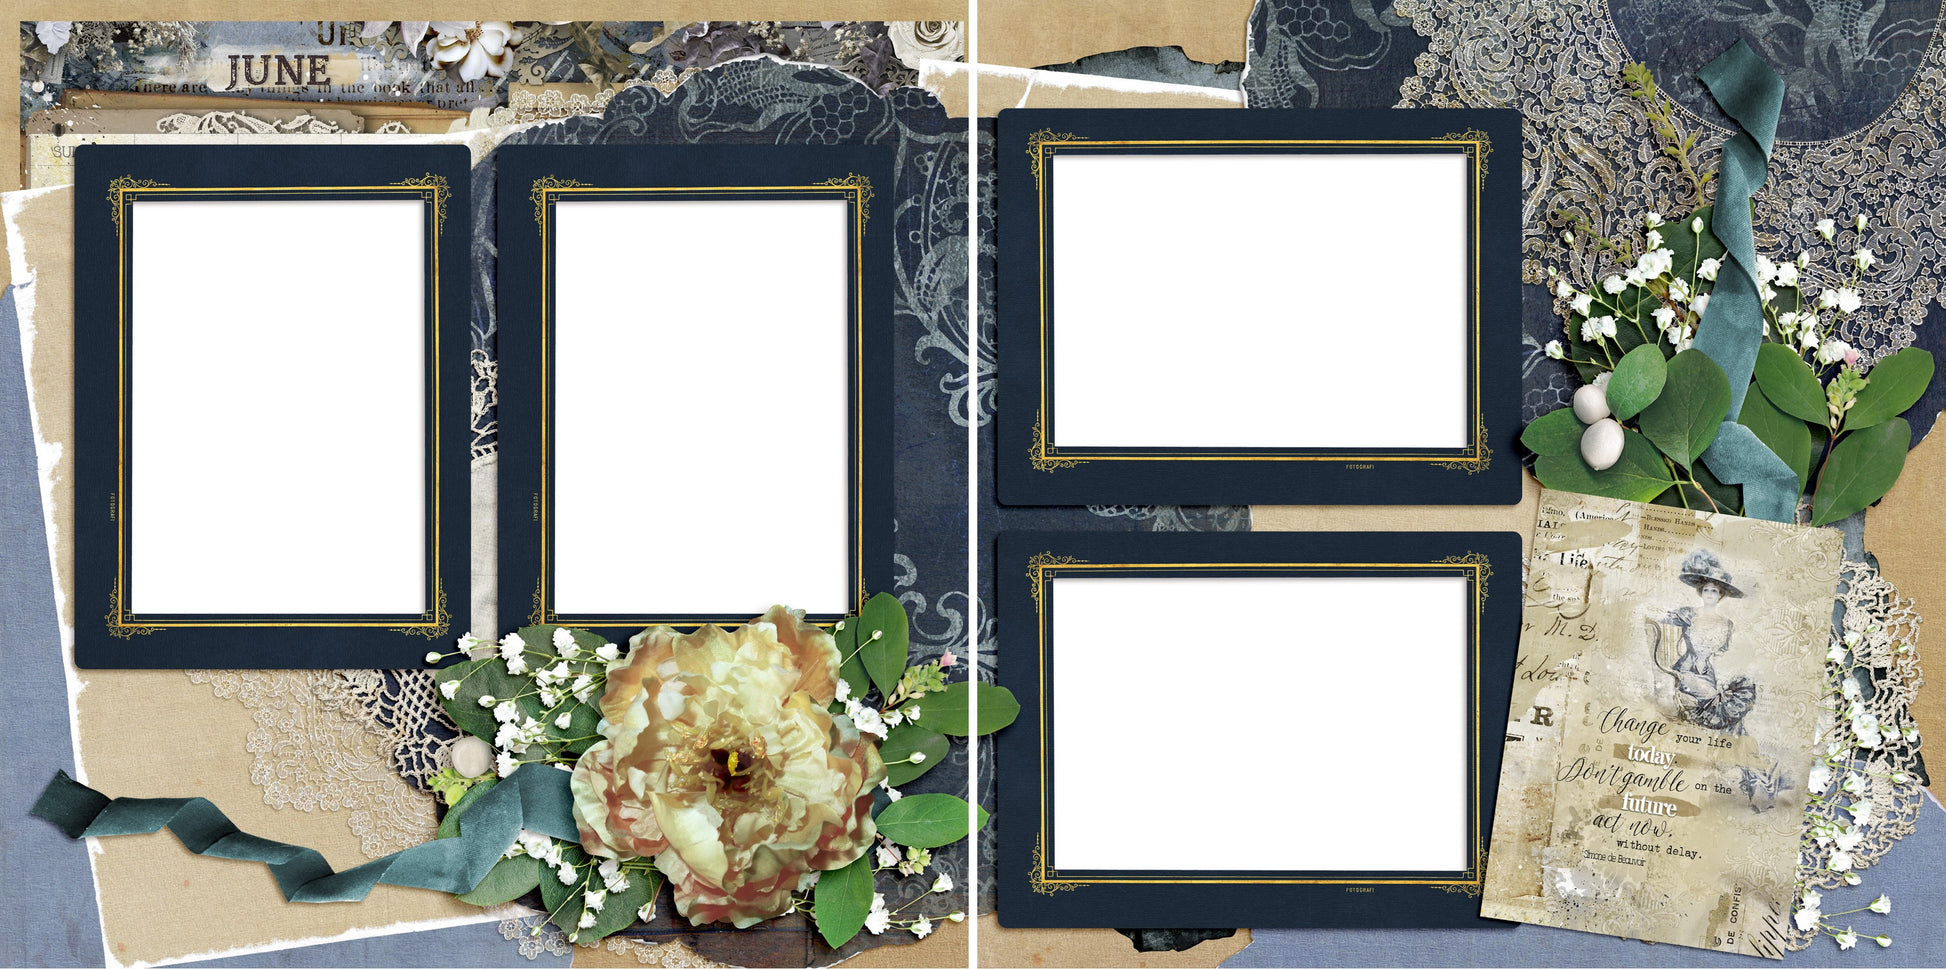 June - Digital Scrapbook Pages - INSTANT DOWNLOAD - EZscrapbooks Scrapbook Layouts Months of the Year